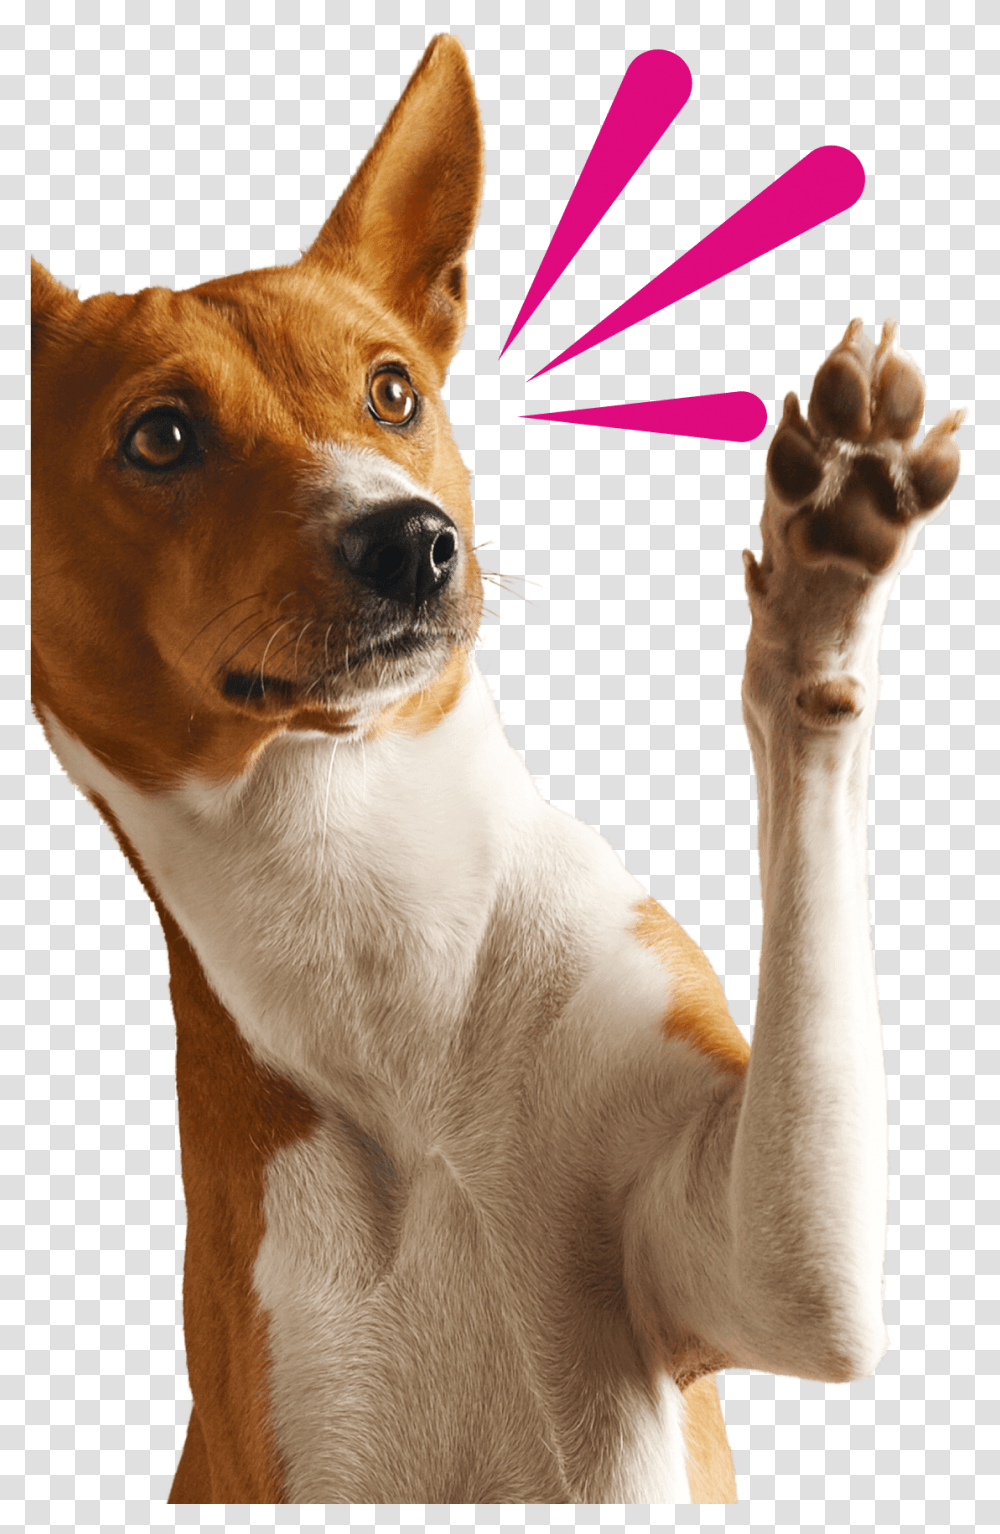 Dog With Arm Up, Pet, Canine, Animal, Mammal Transparent Png